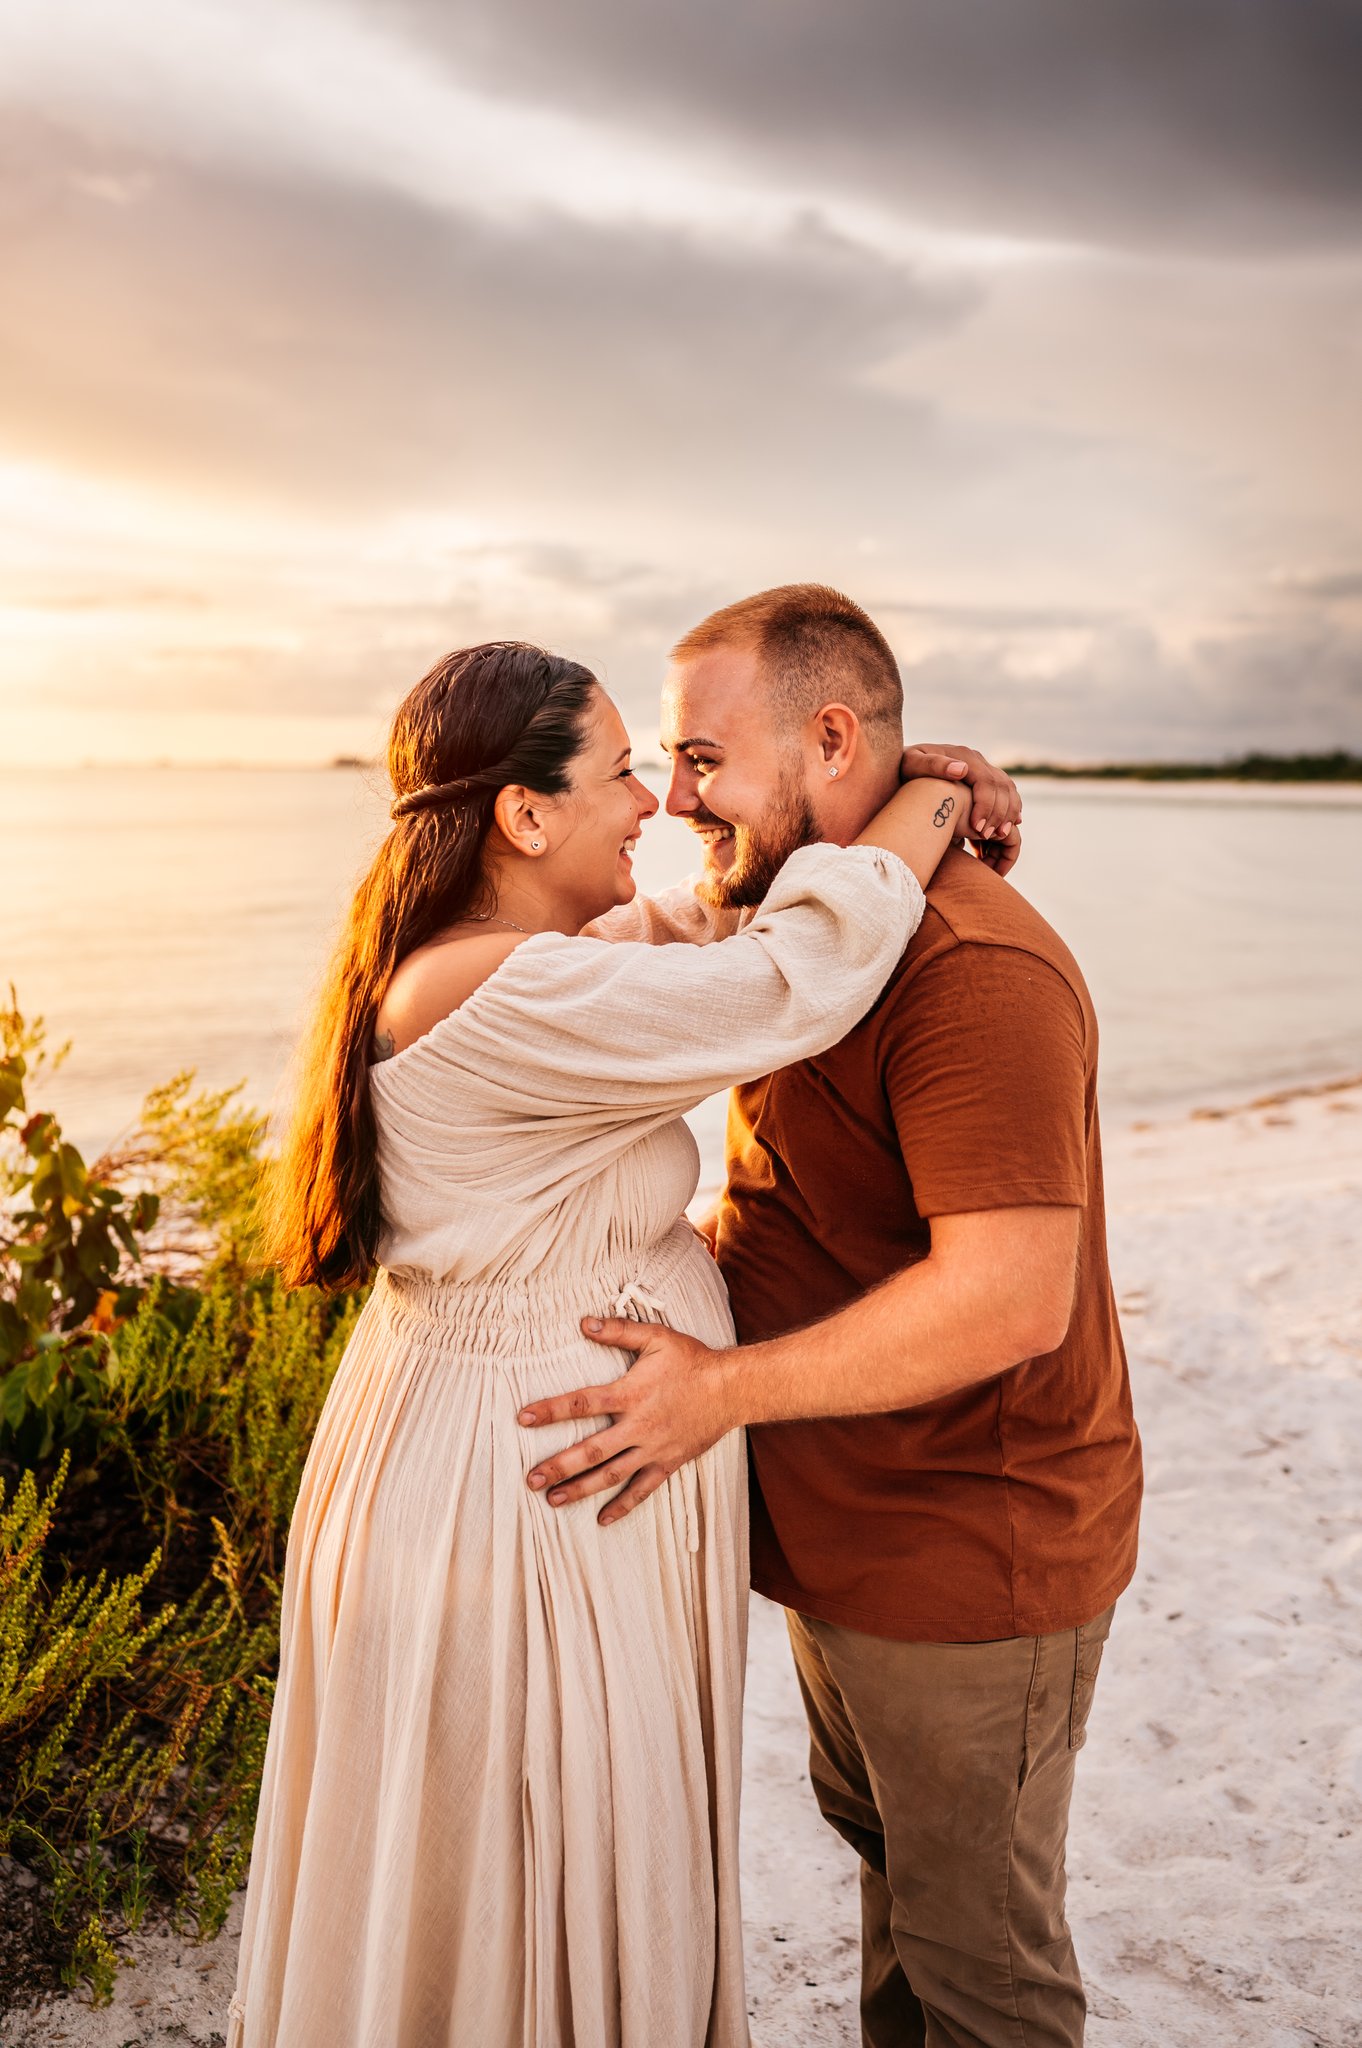 Sarah of Chasing Creative is a couple + family + maternity photographer in Southwest, Florida - primarily shooting in Fort Myers, Estero, Naples, Bonita Springs, Sanibel and Captiva. Learn more about Chasing Creative or pricing for photoshoots here.